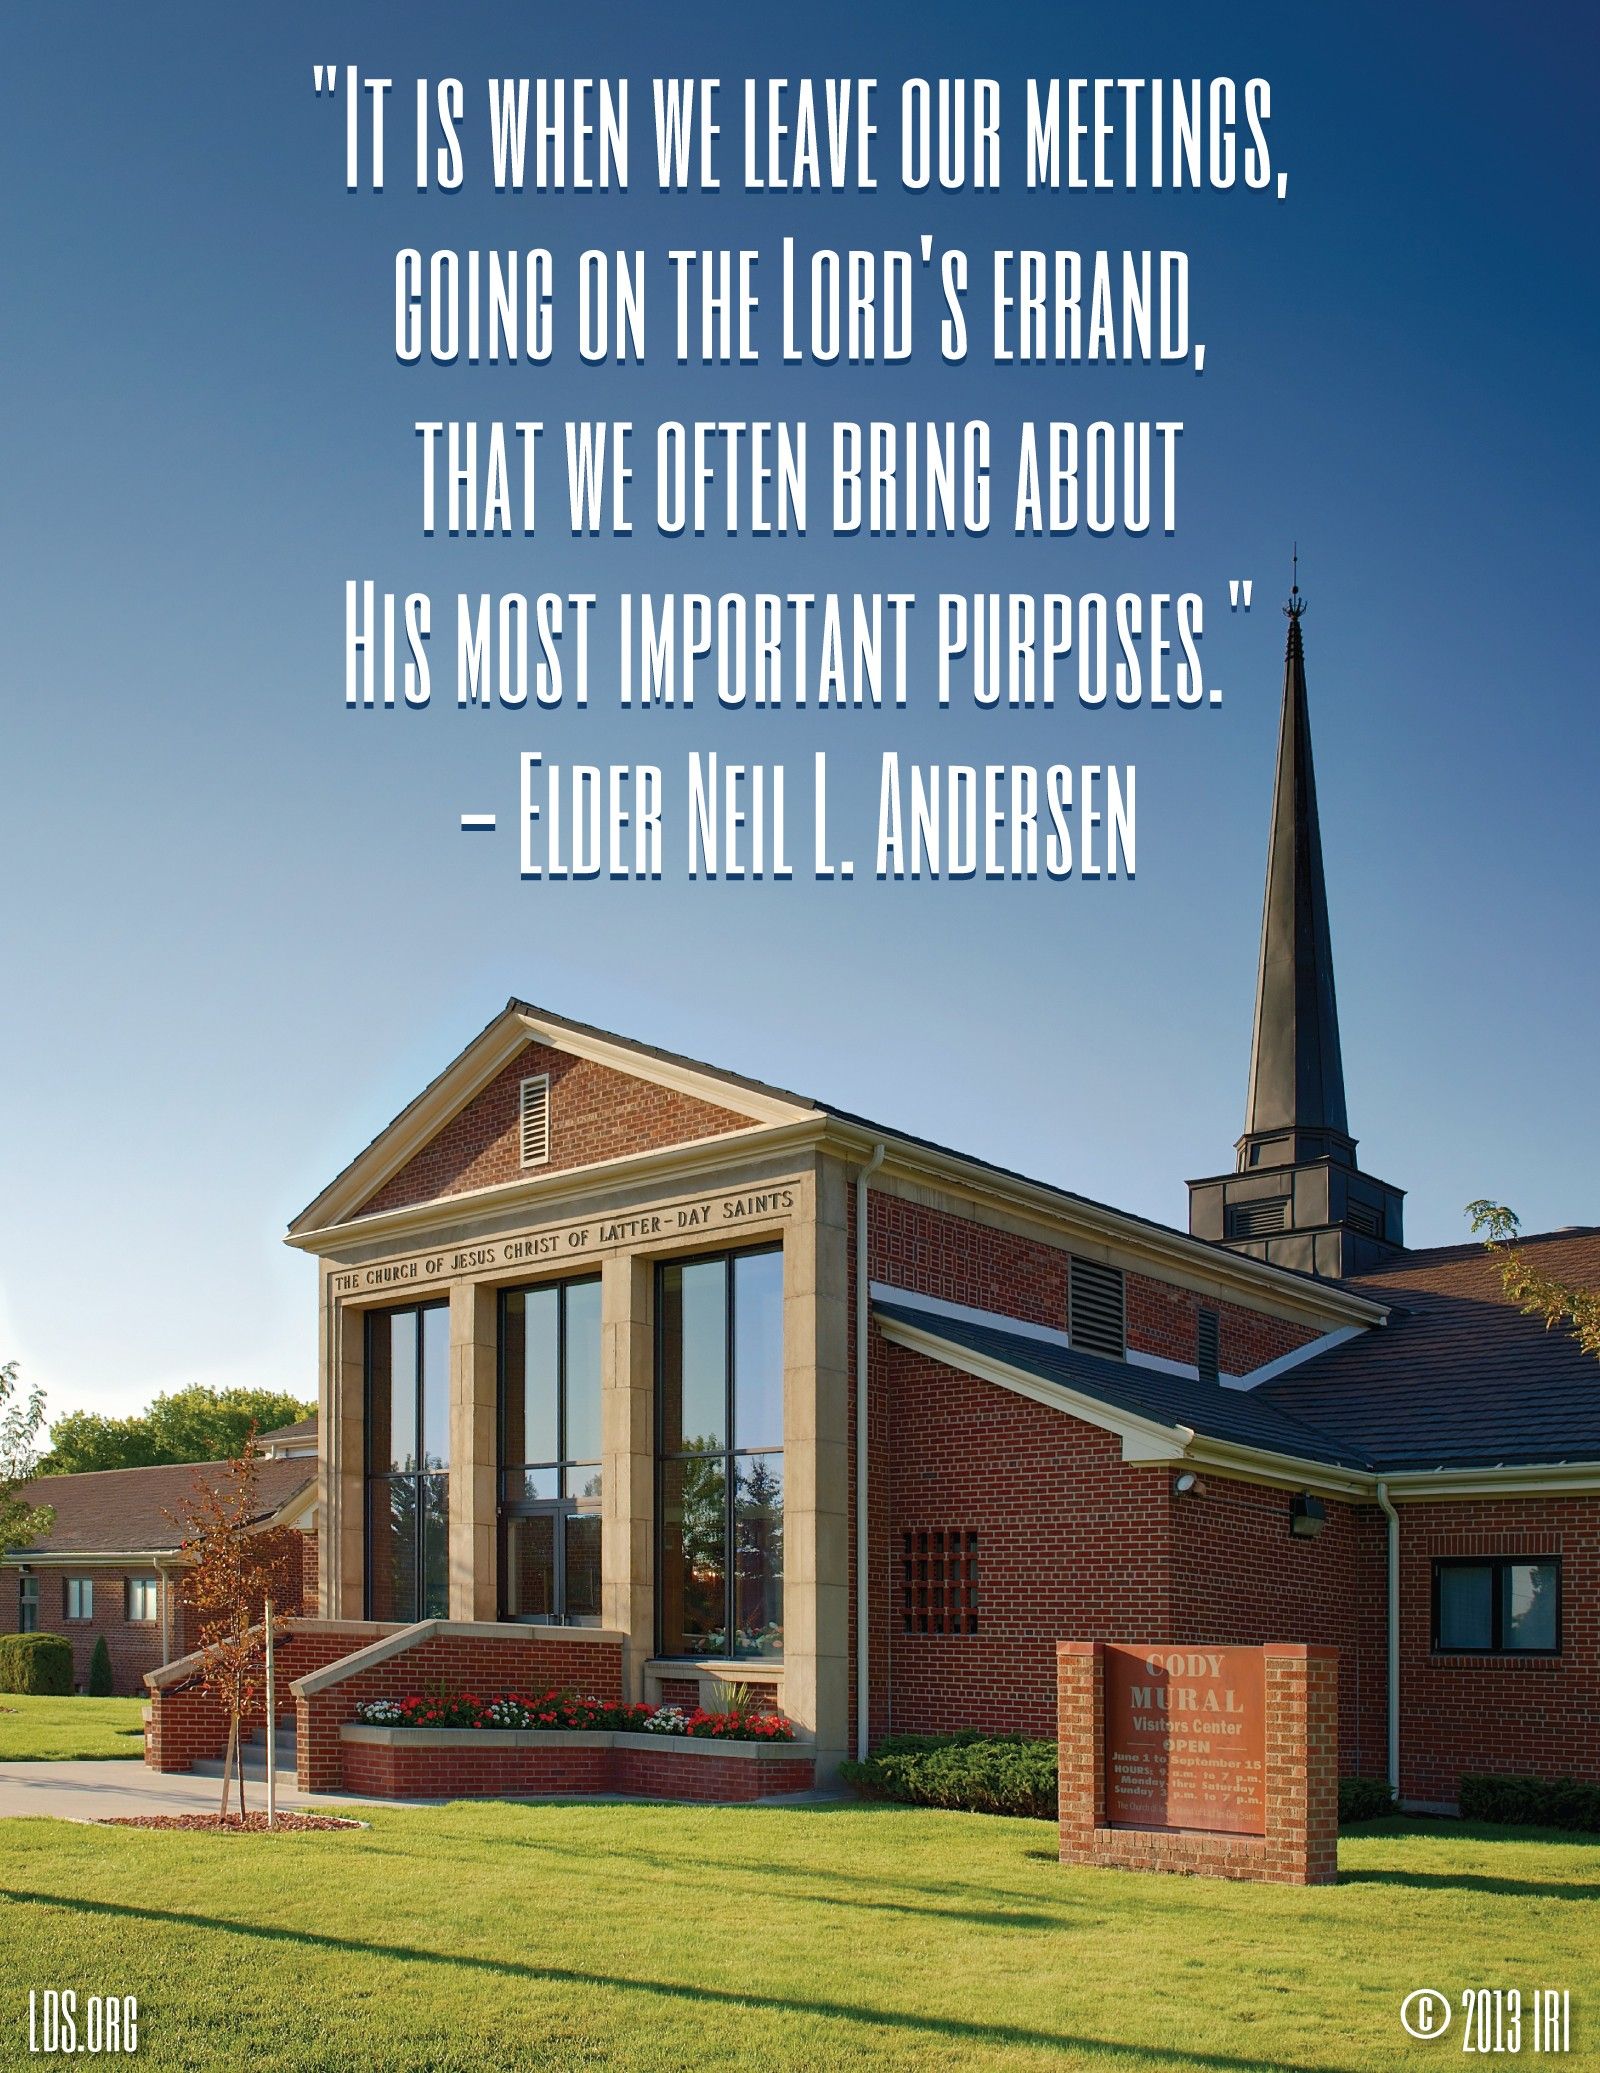 “It is when we leave our meetings, going on the Lord’s errand, that we often bring about His most important purposes.”—Elder Neil L. Andersen, “A Spiritual Work”